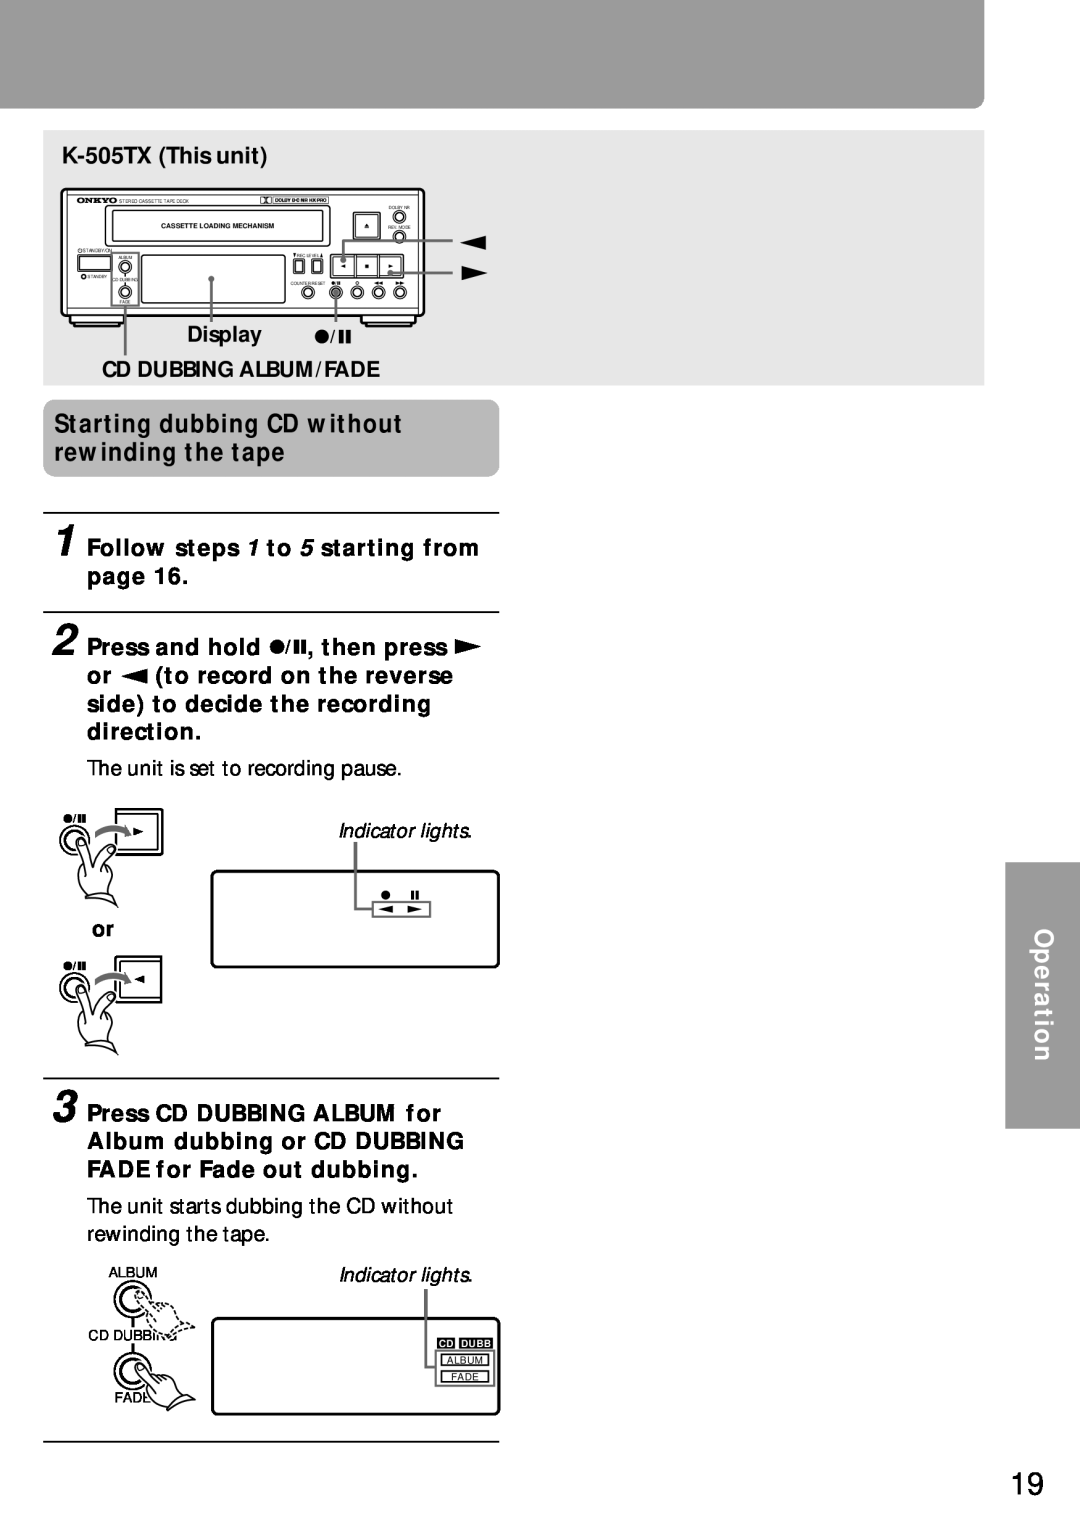 Onkyo K-505TX instruction manual Starting dubbing CD without rewinding the tape, Operation 